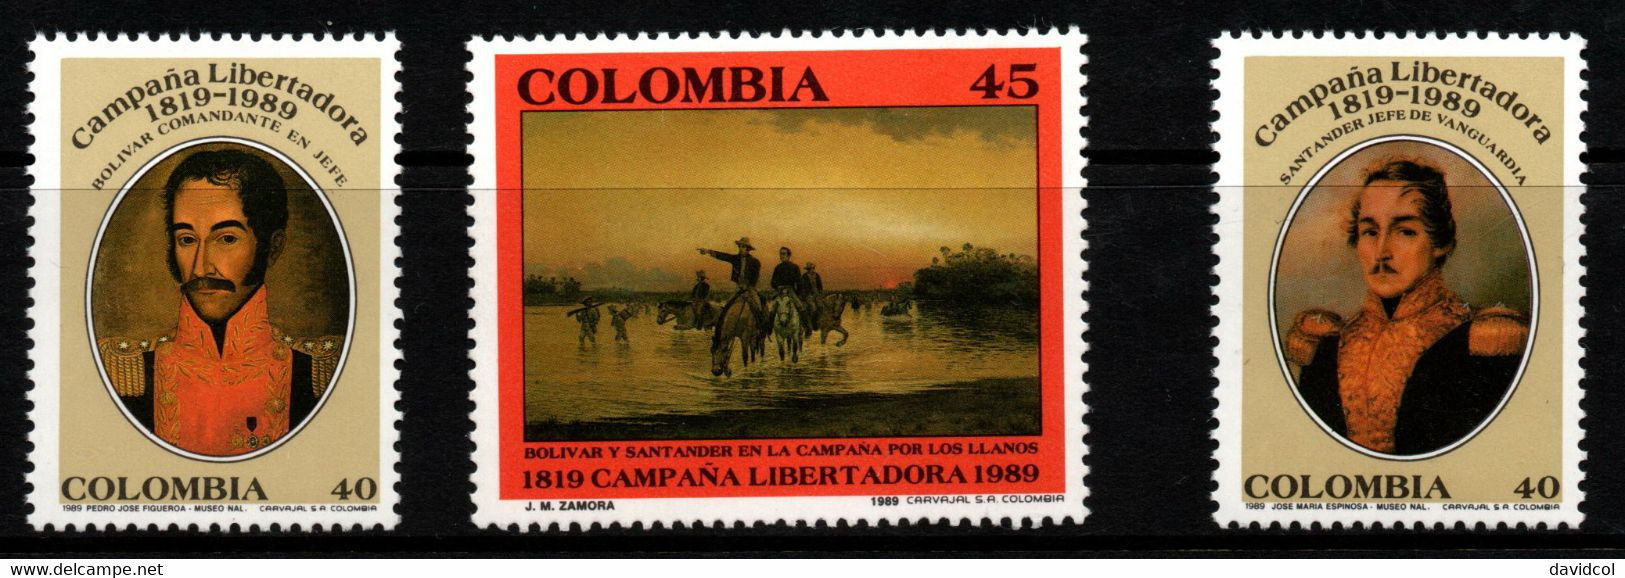 14- KOLUMBIEN - 1989 - MI#:1760-1762 - MNH- 170 YEARS OF THE LIBERATION CAMPAIGN - Colombia